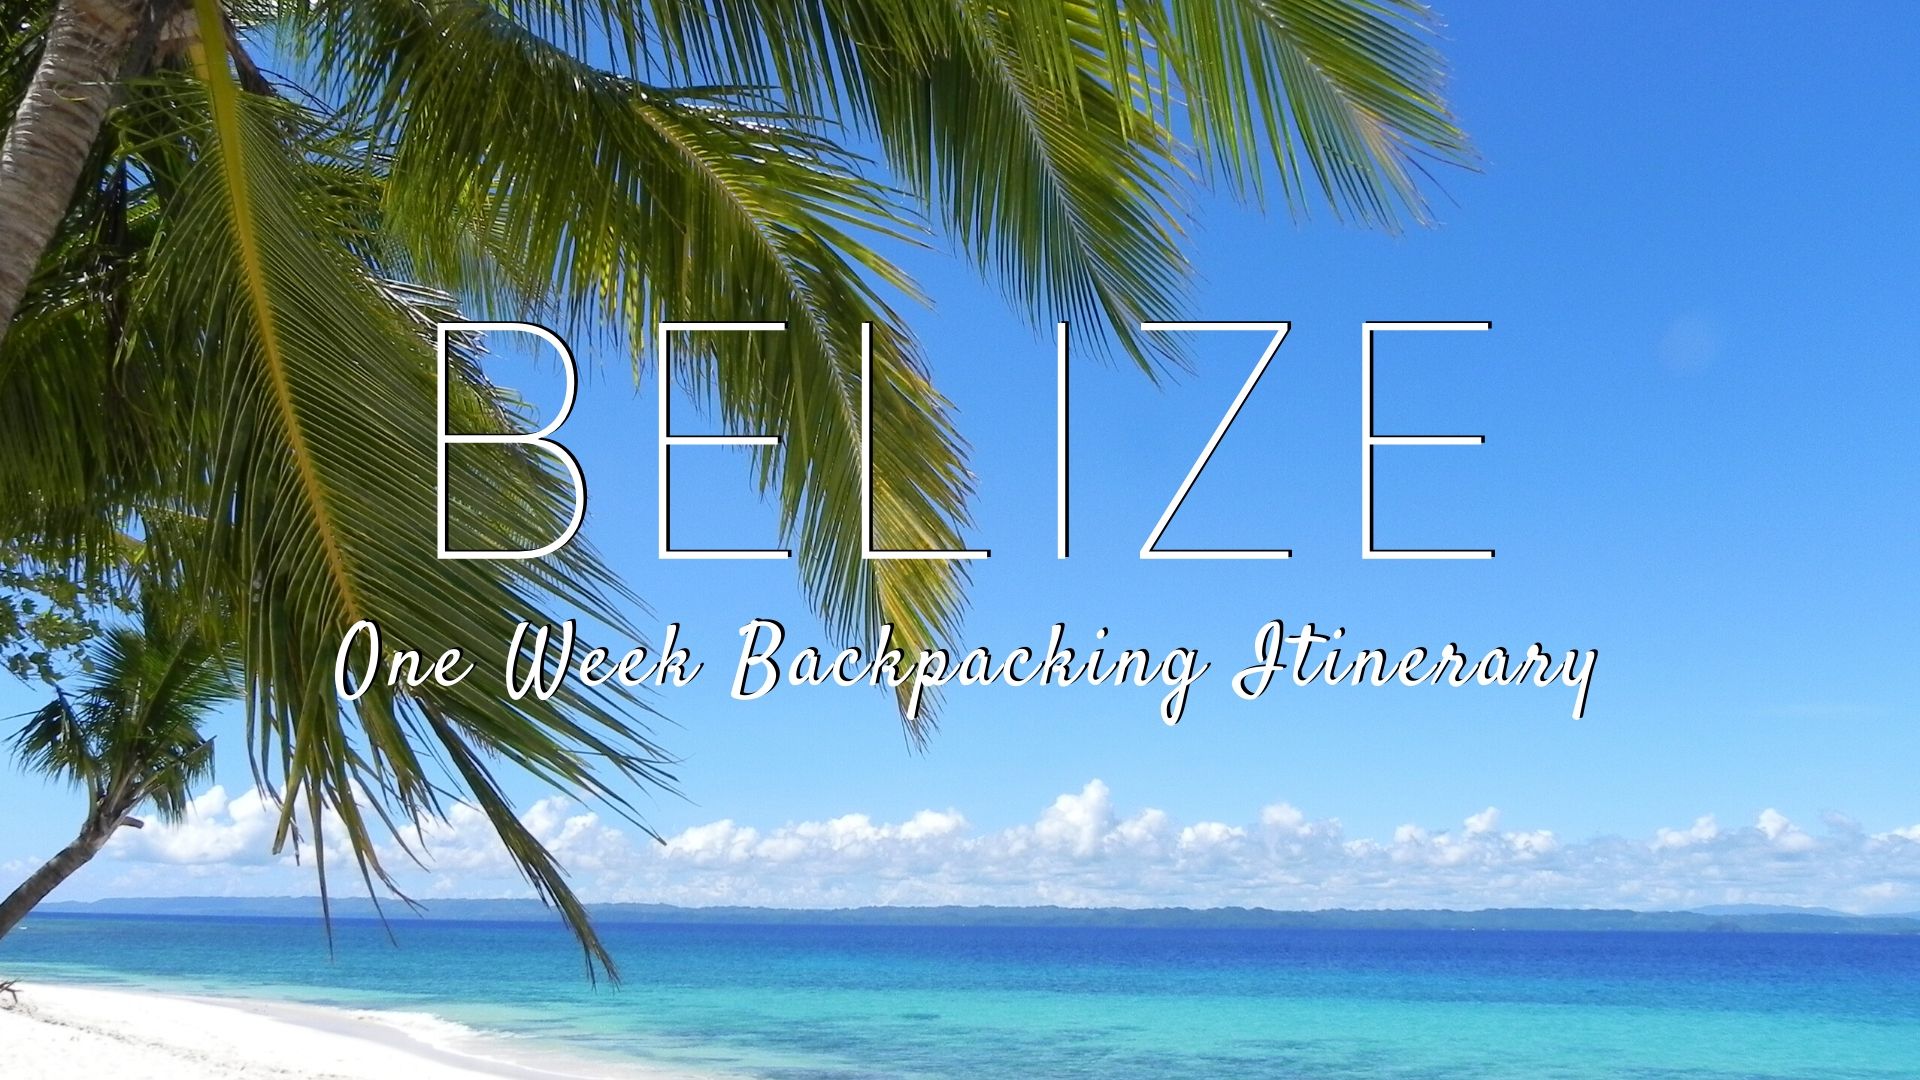 One week backpacking belize itinerary, belize backpacking, caye caulker san pedro hopkins placencia belize travel itinerary cover